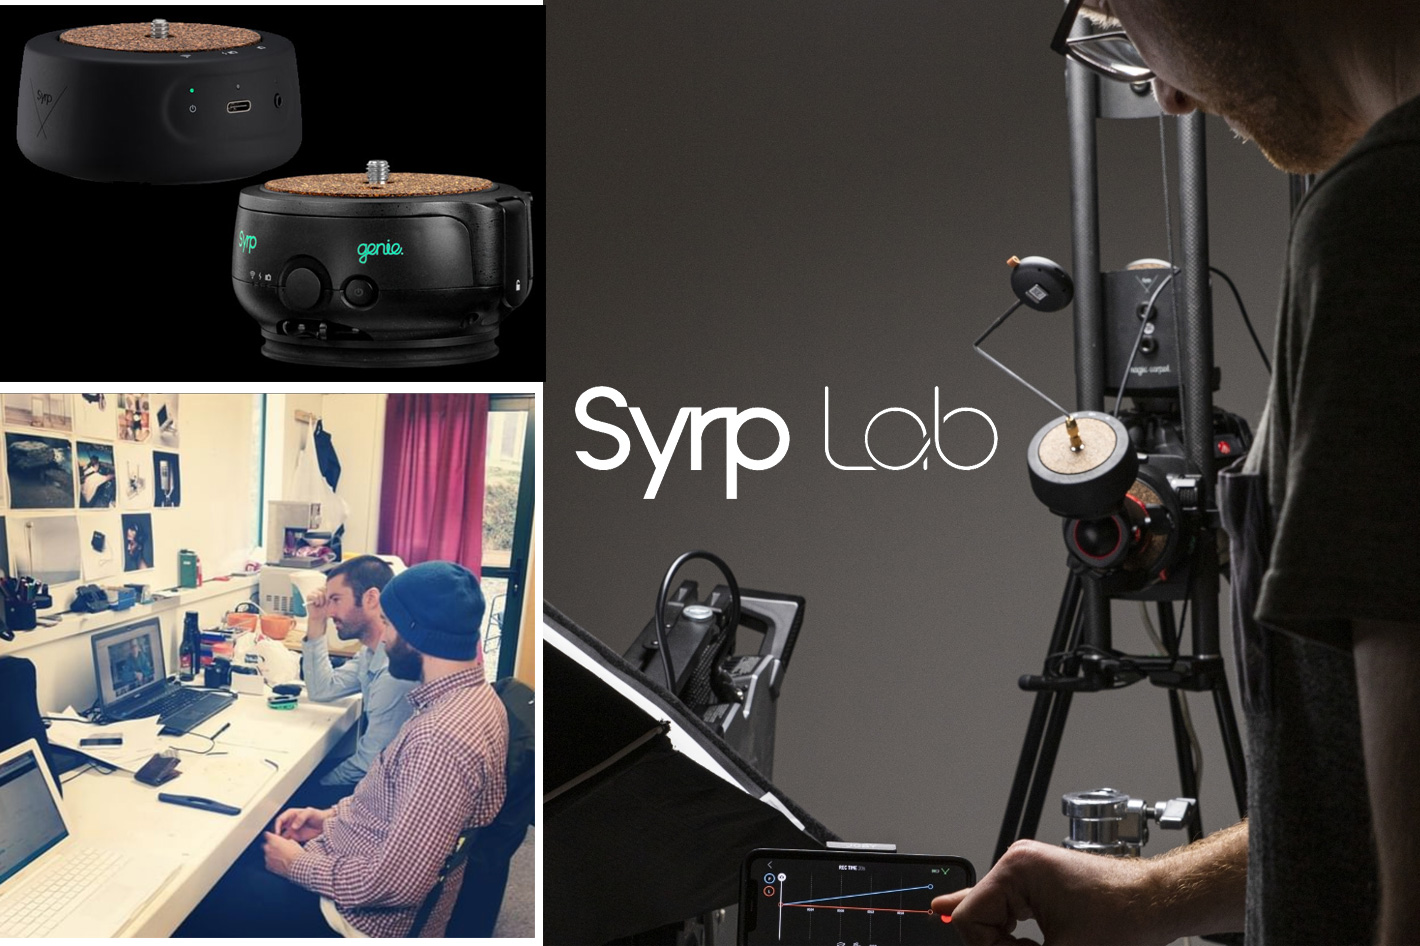 Syrp Lab: building the next generation of tools for creators